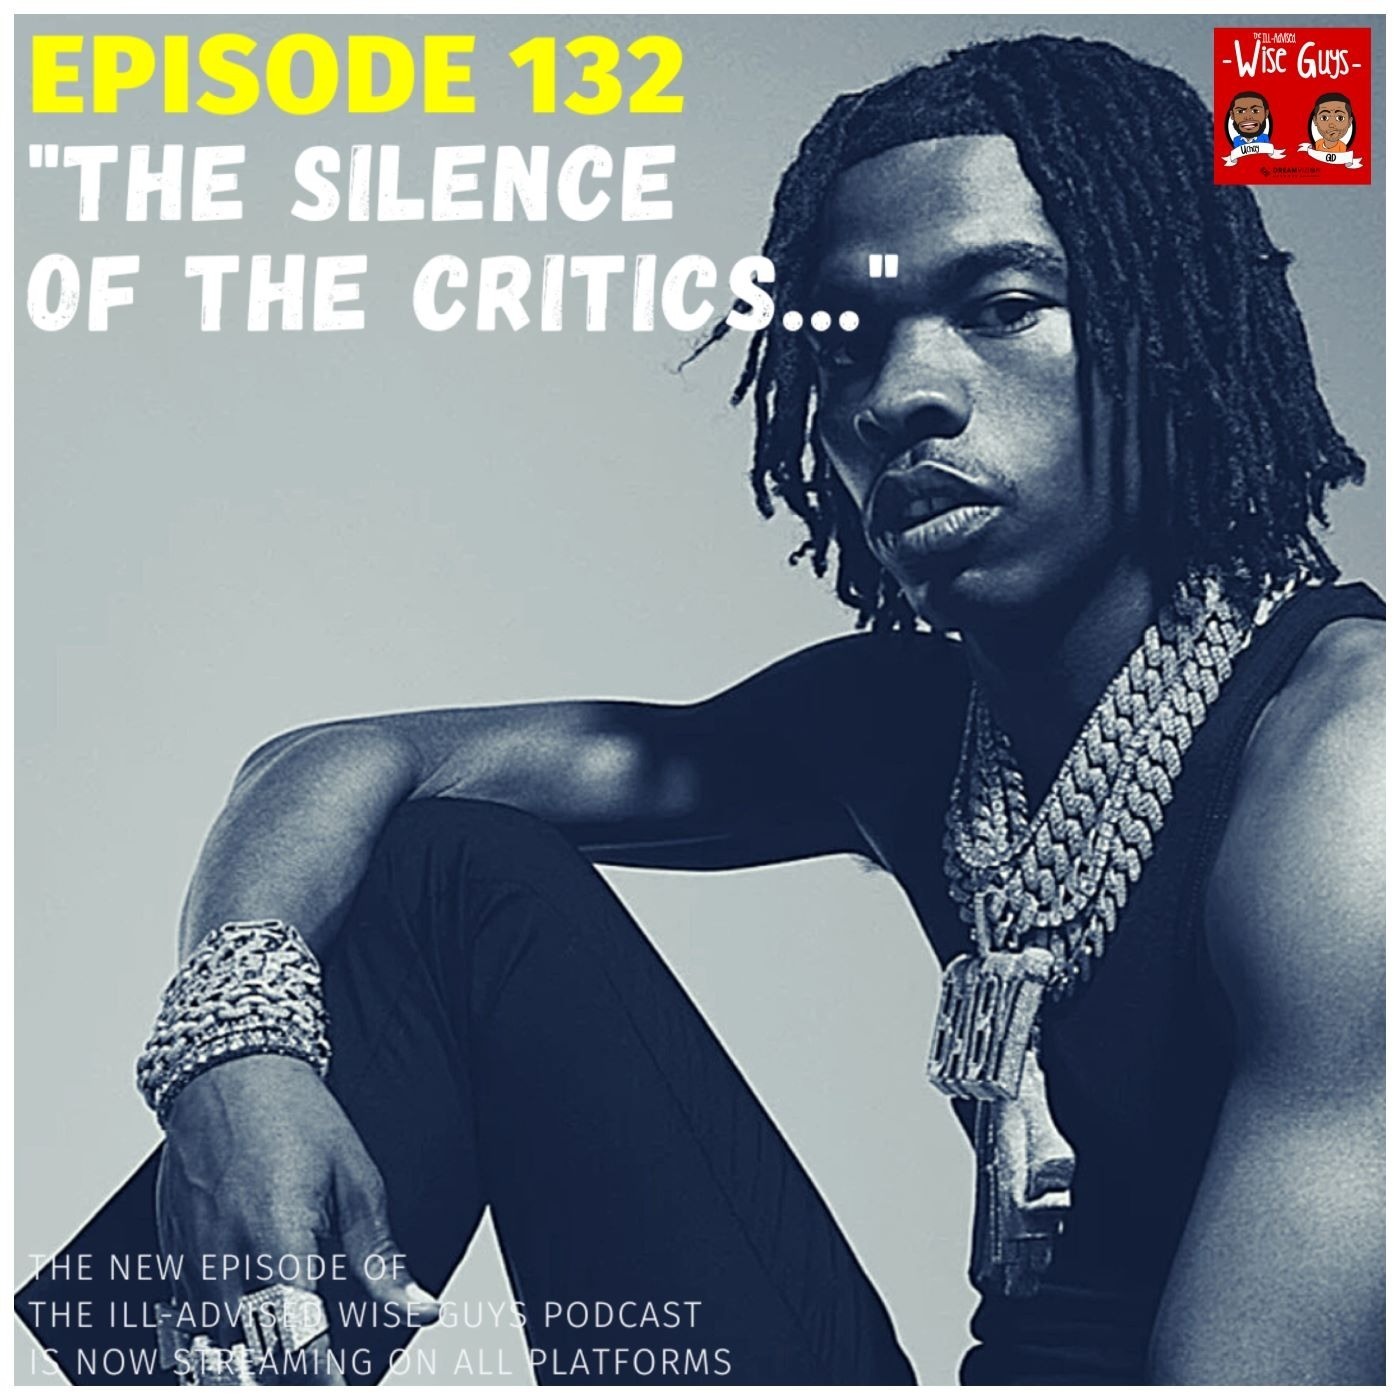 Episode 132 - "The Silence of the Critics..."